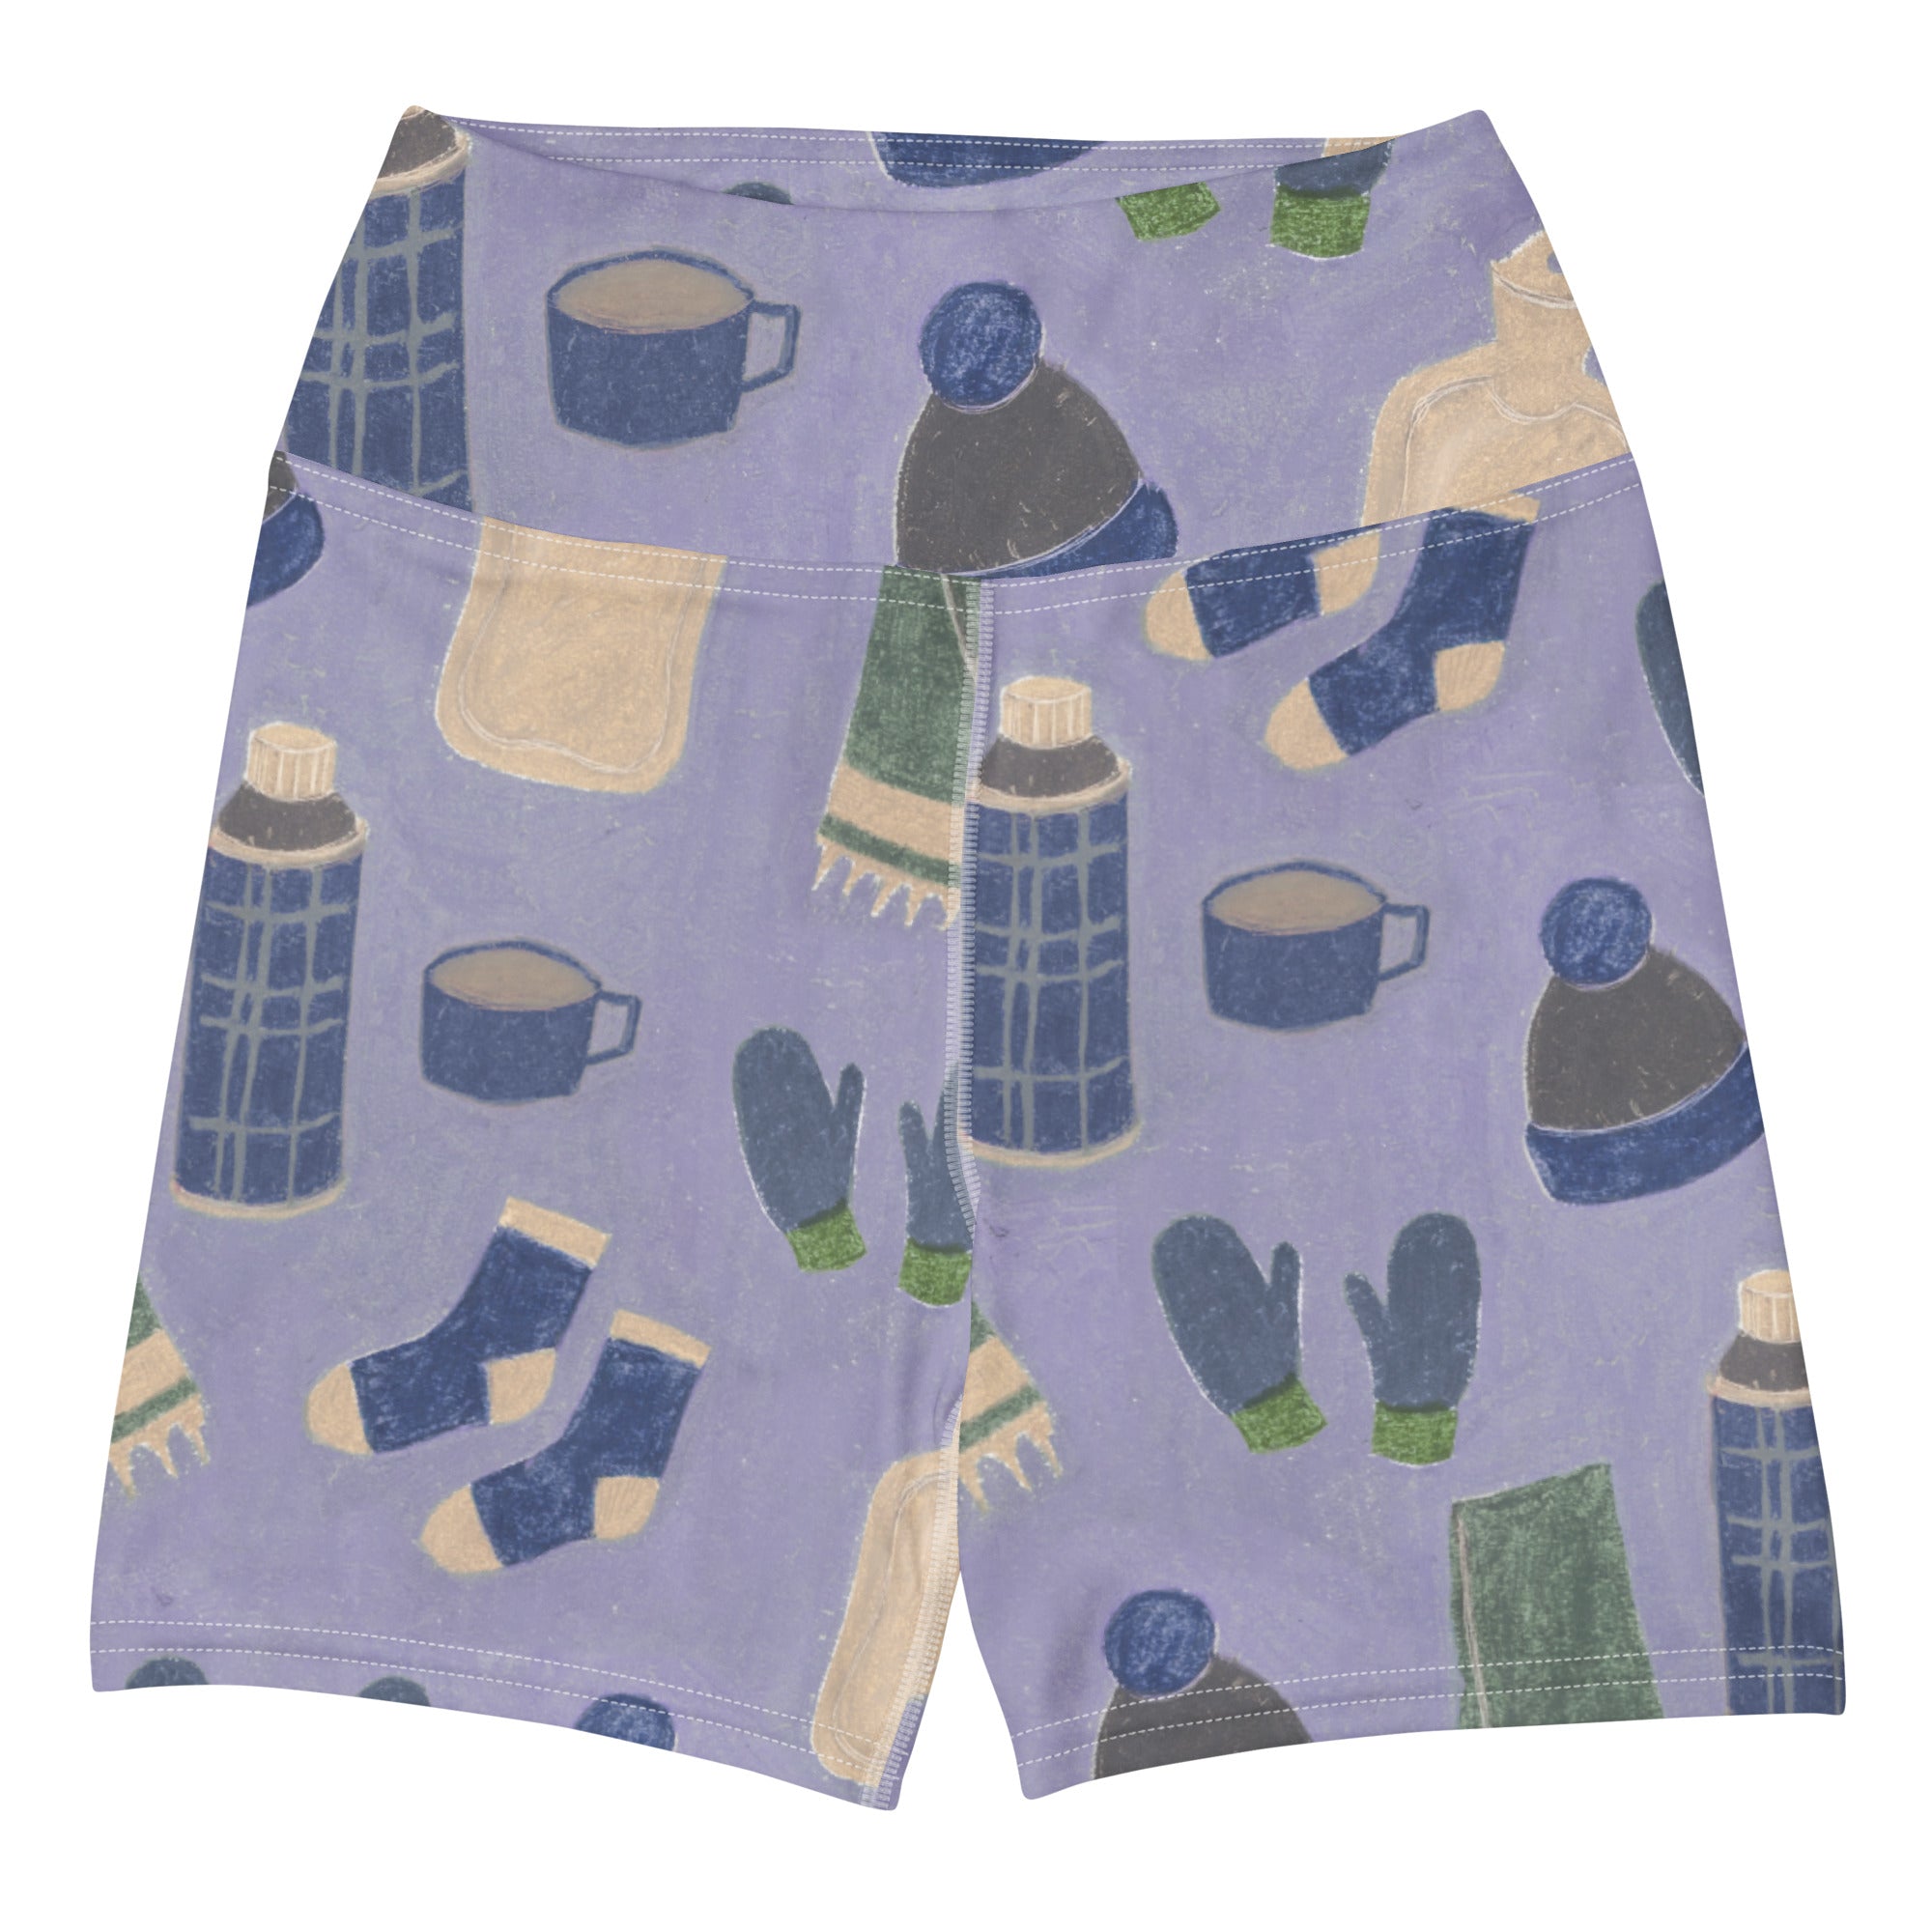 Winter Swim Swim Shorts (Made to order please read the information)